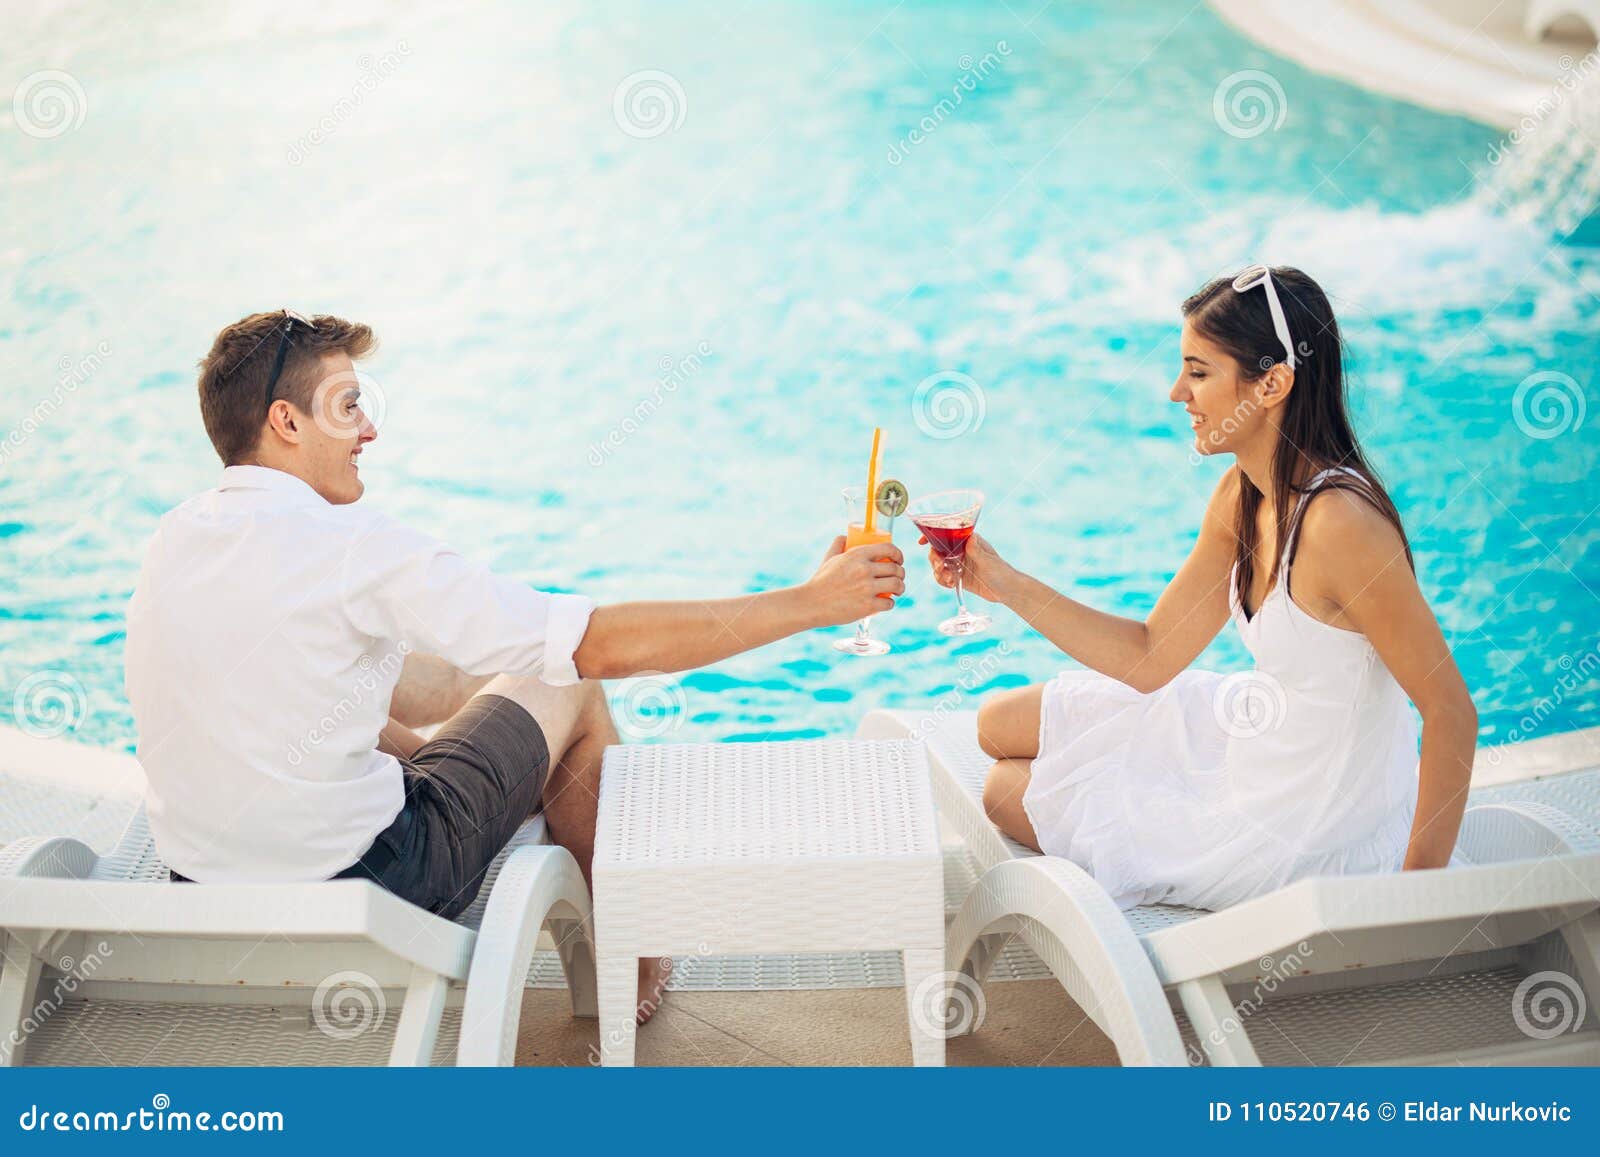 Positive Happy Couple Having a Romantic Afternoon by the Pool in